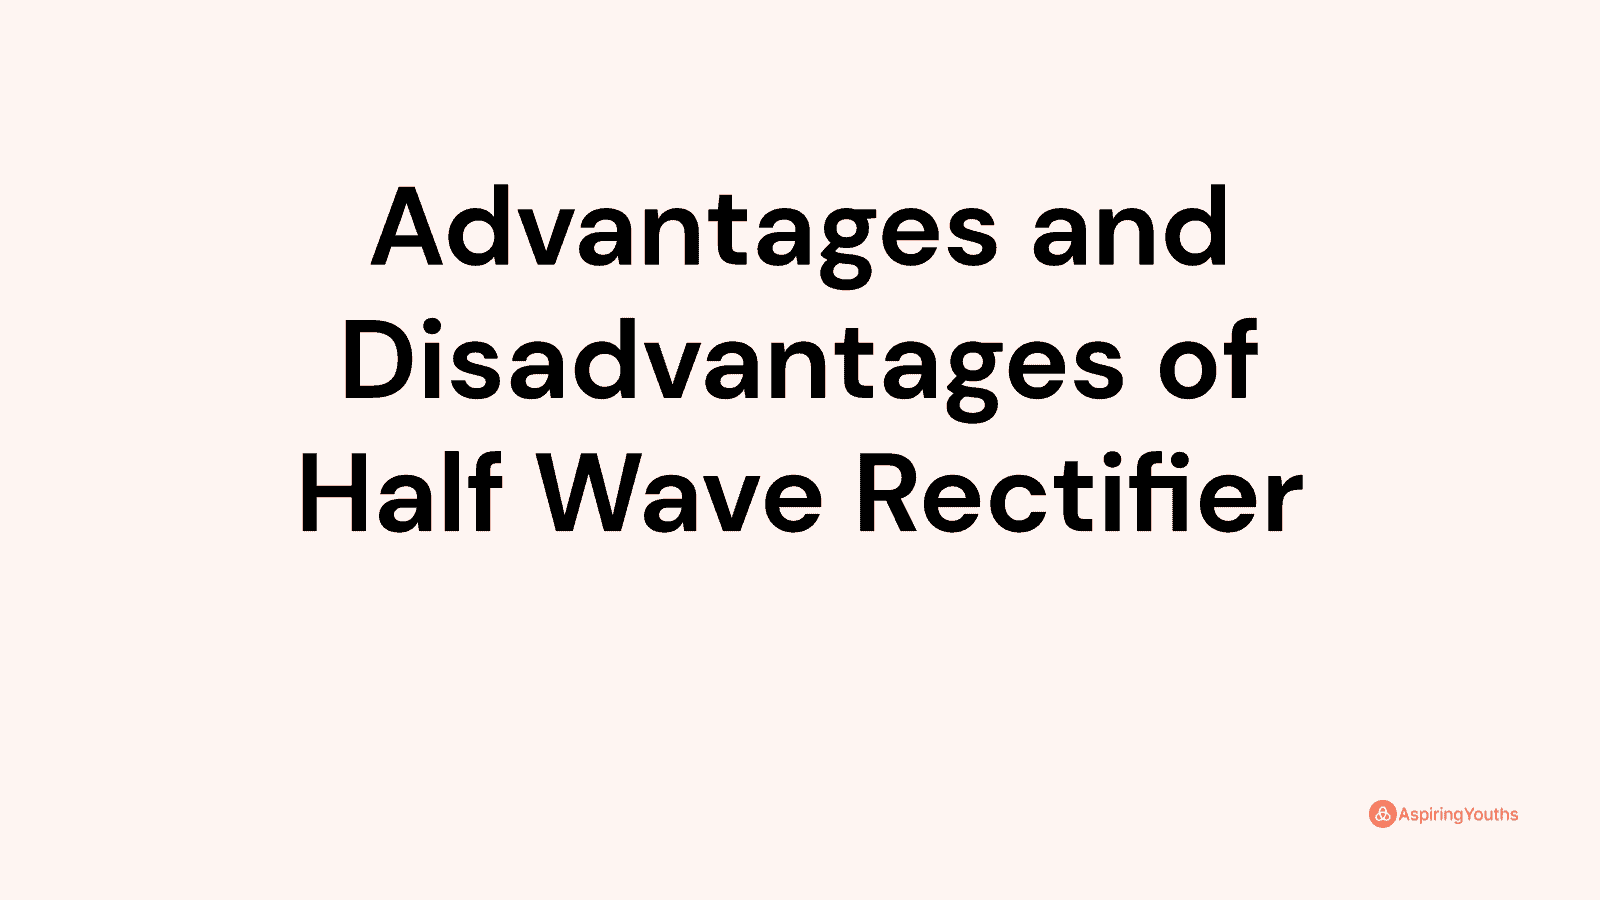 Advantages and disadvantages of Half Wave Rectifier